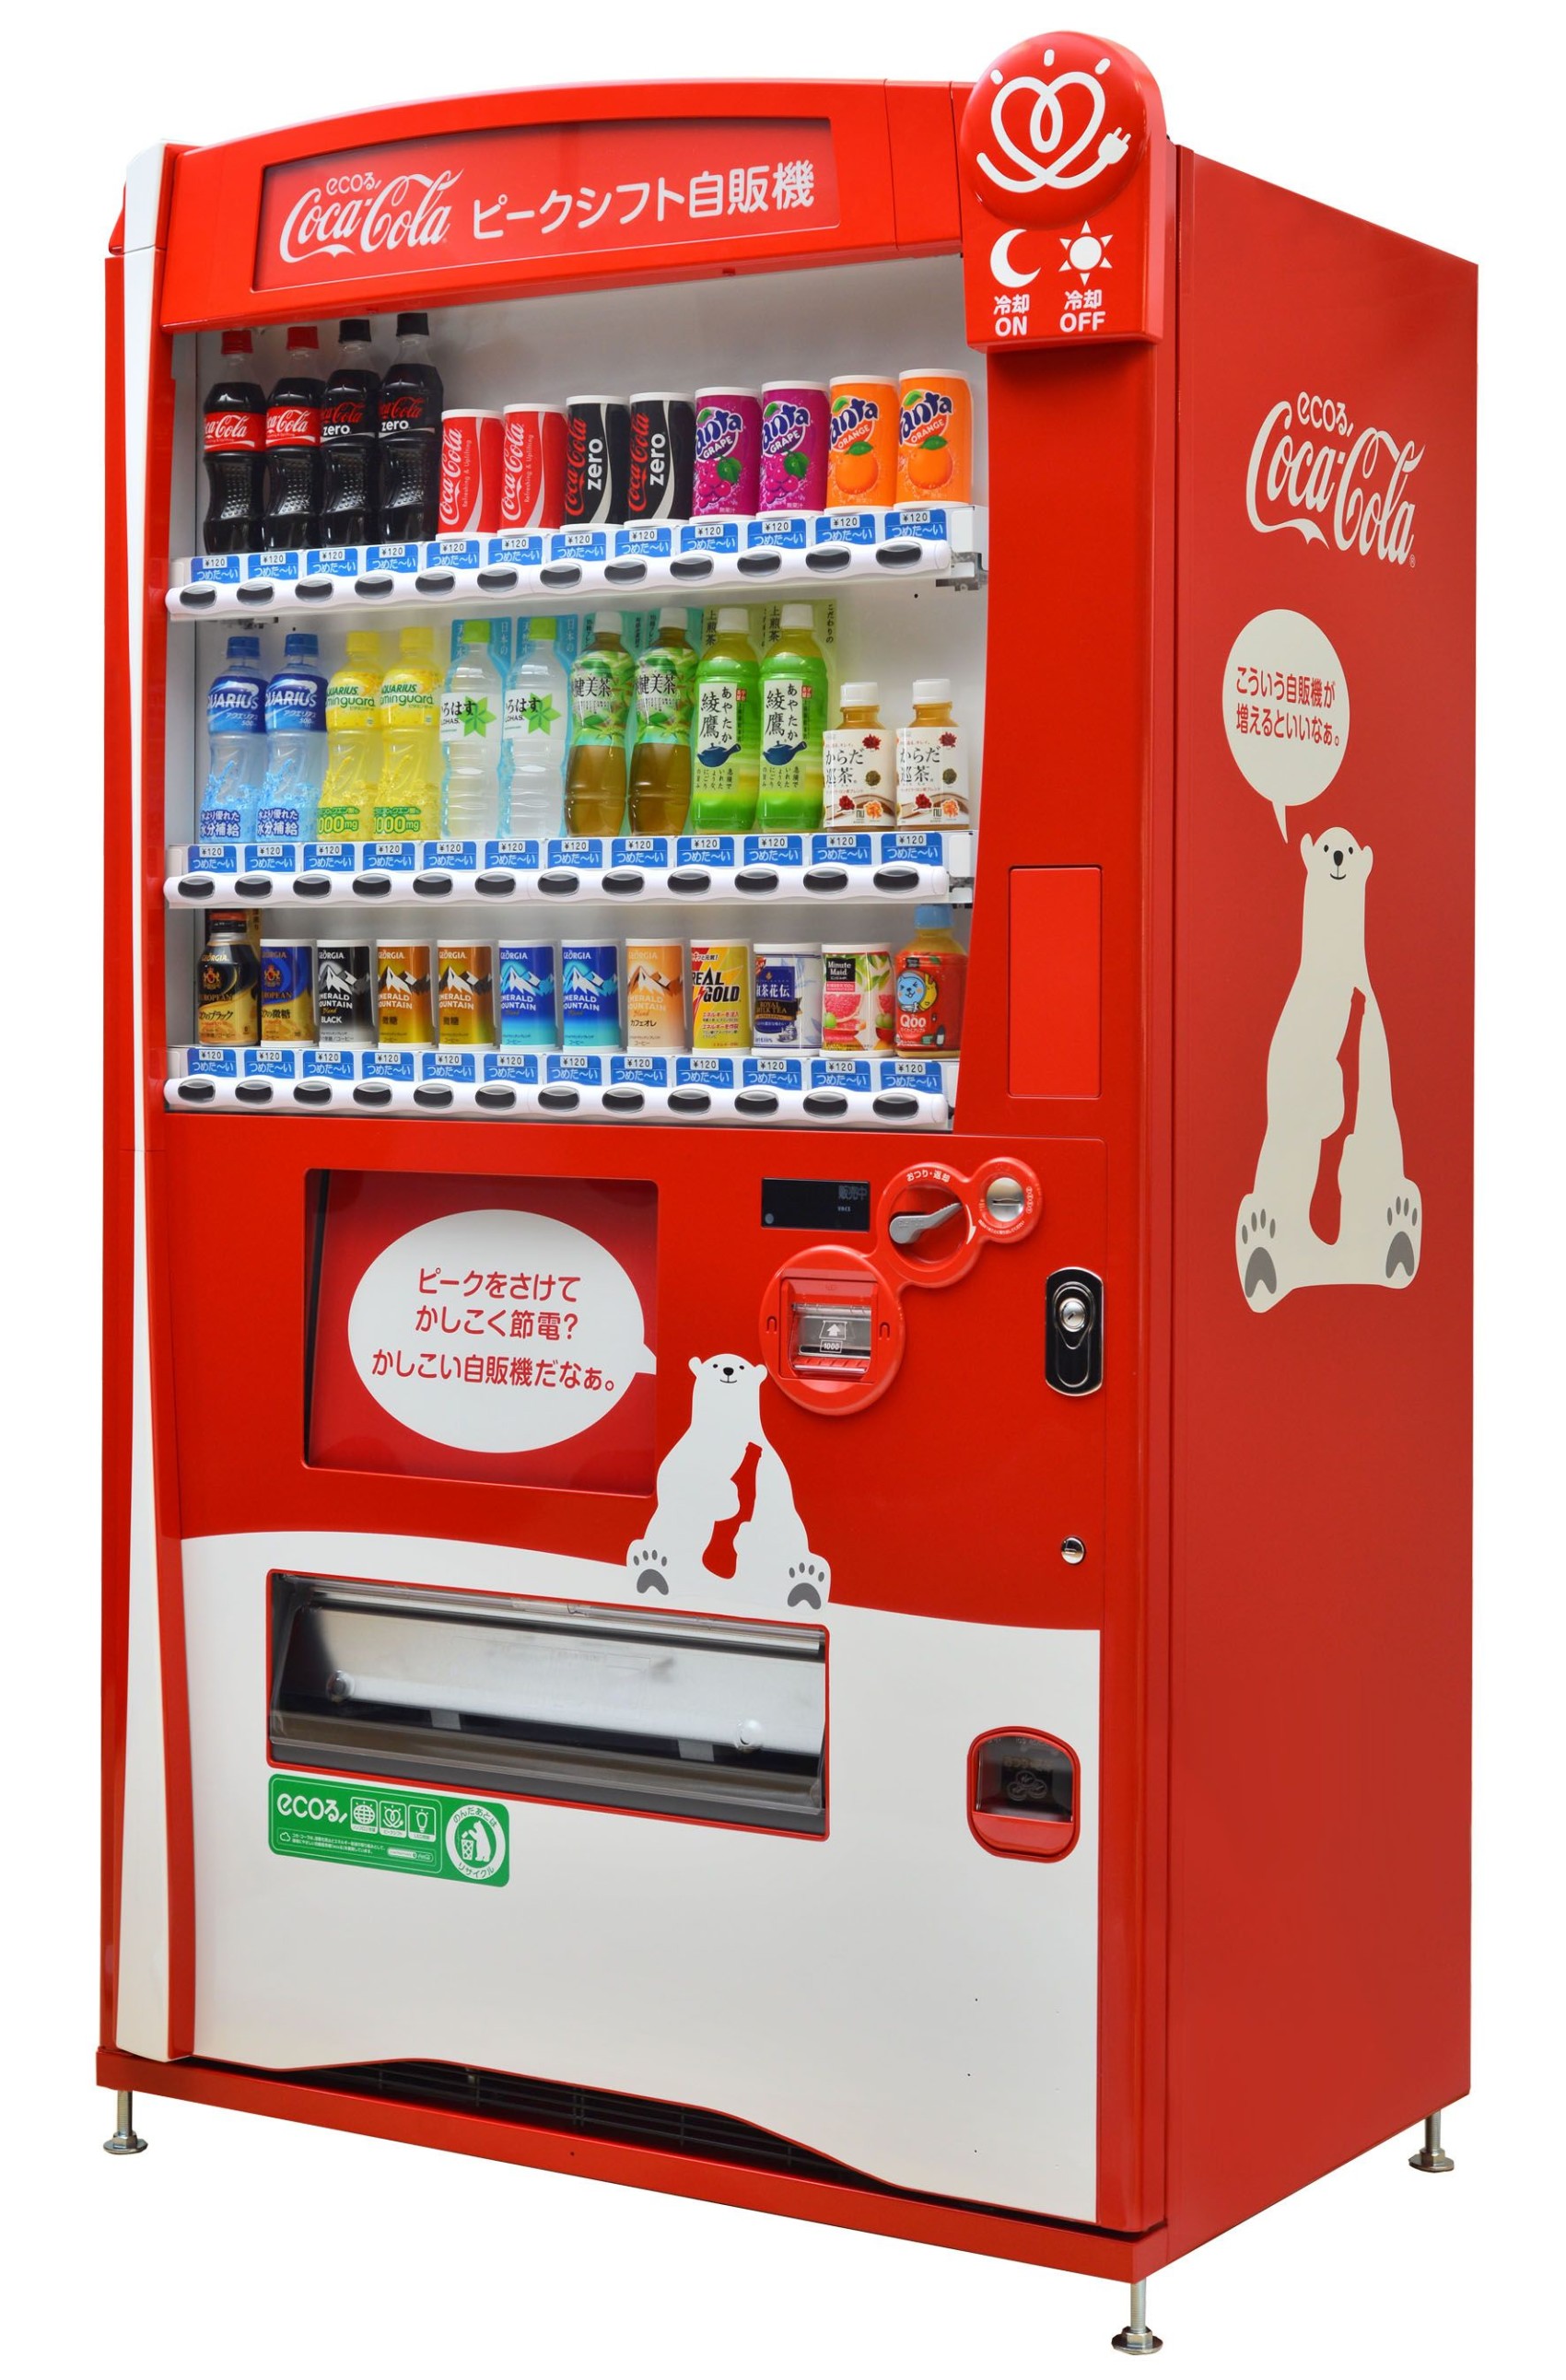 CocaCola's new vending machines shift power use for cooling purposes